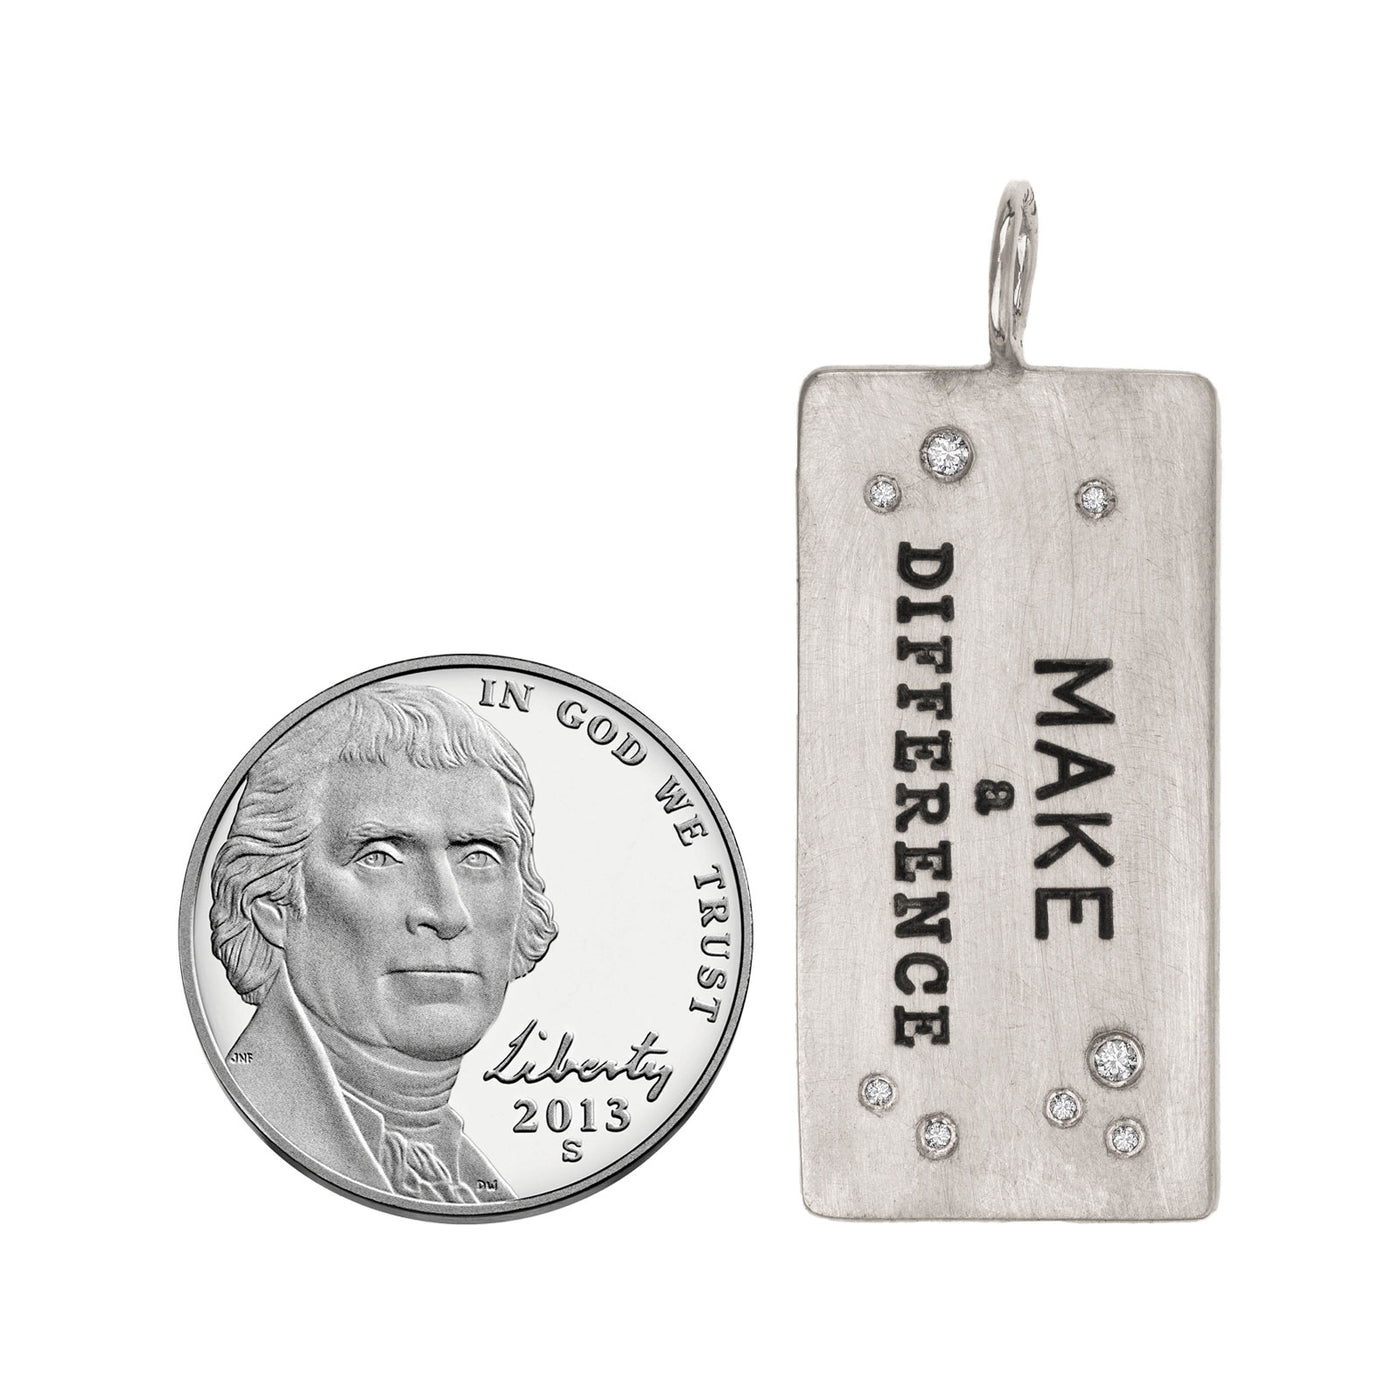 Make a Difference ID Tag